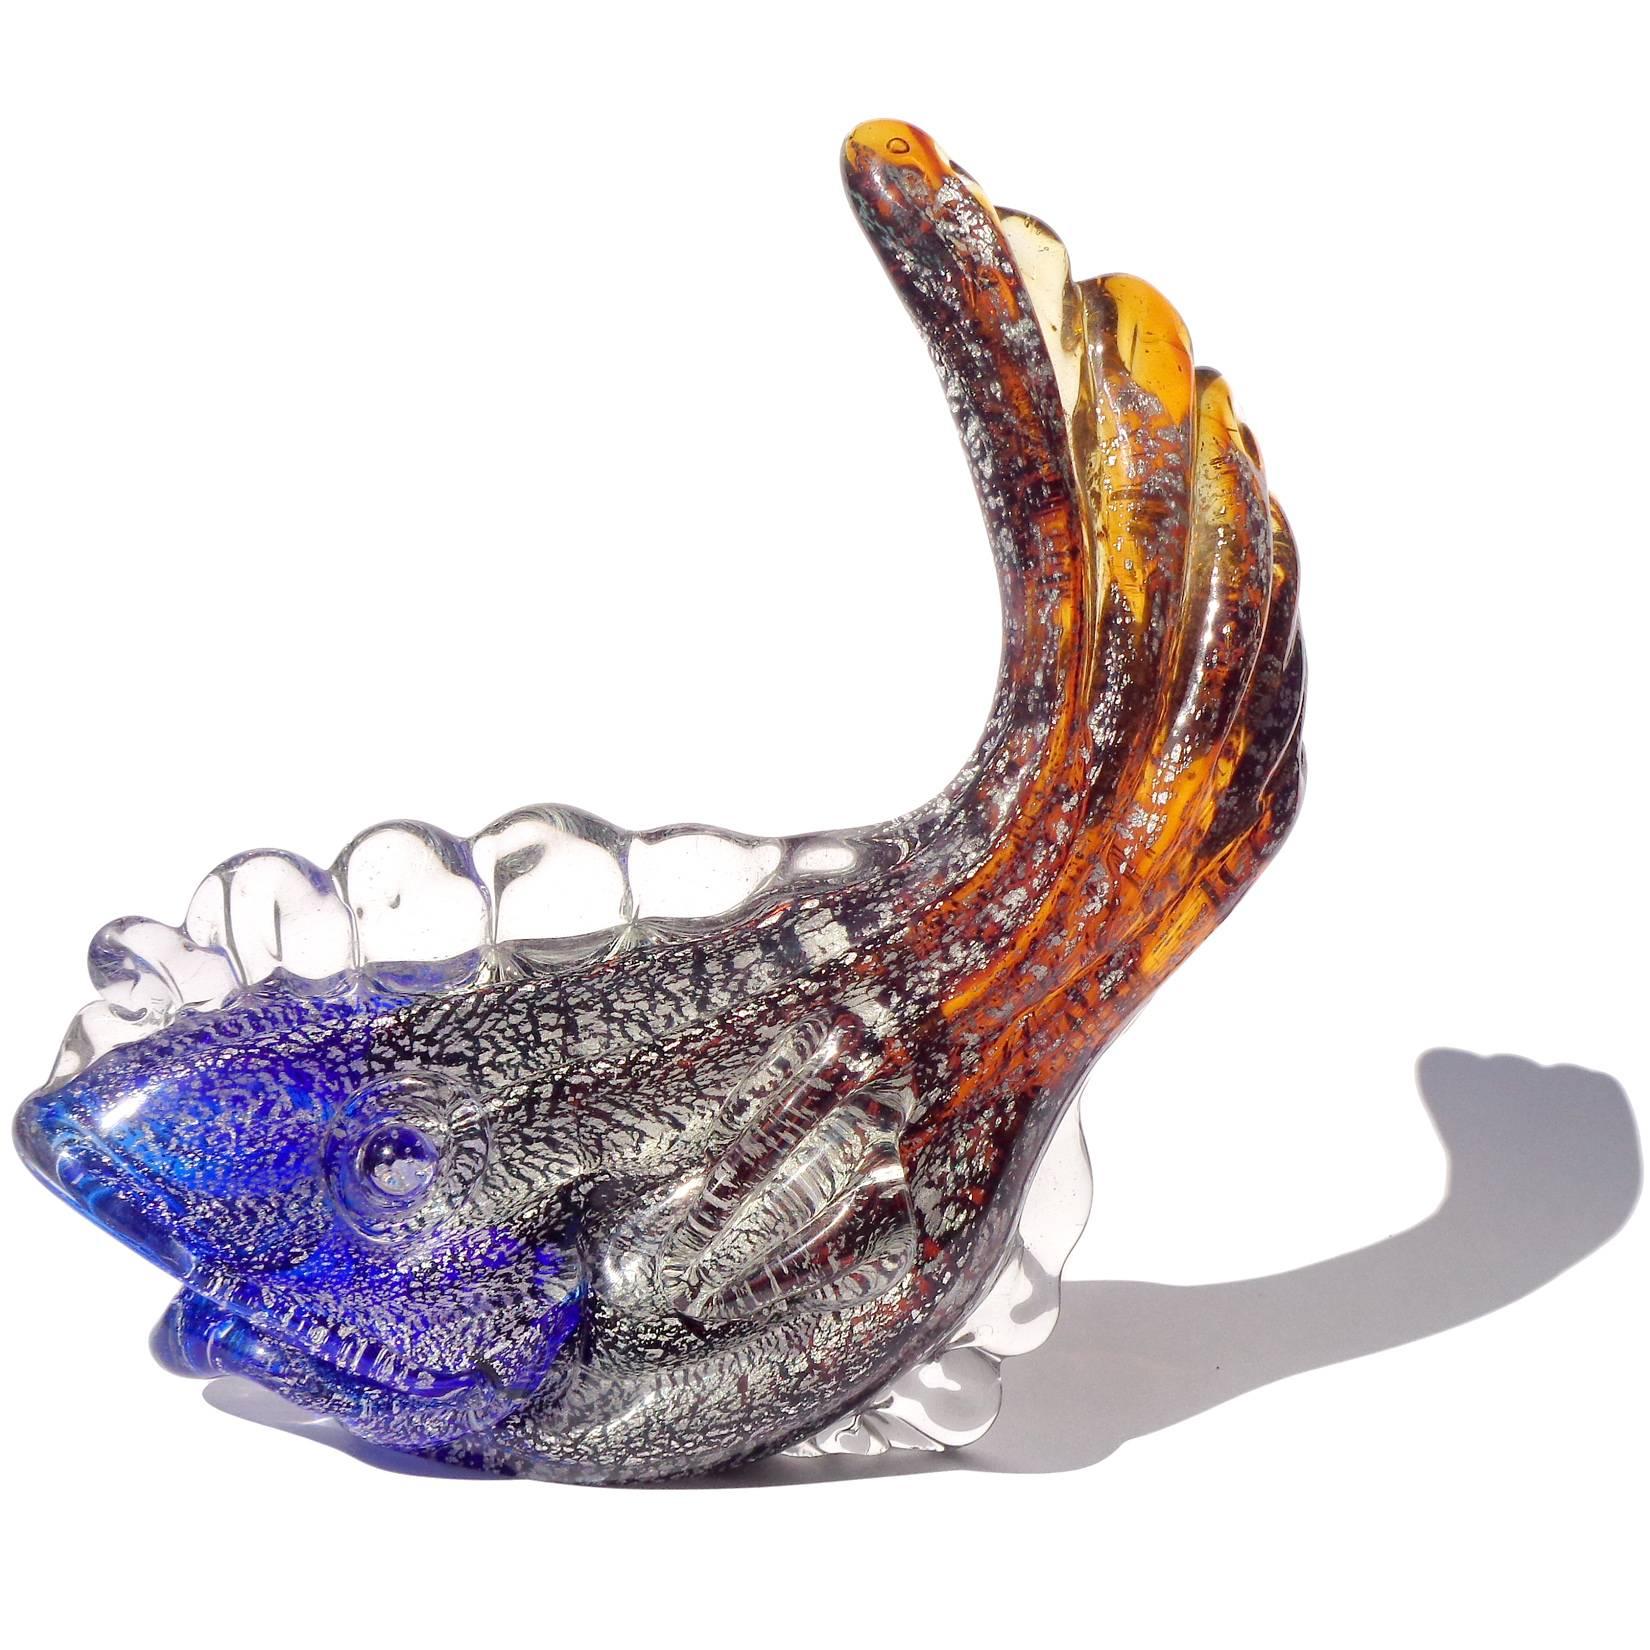 Early Murano hand blown Sommerso orange to cobalt blue Italian art glass fish sculpture, covered in silver leaf. Attributed to the Seguso Vetri D' Arte company, circa 1940s. It is very thick and robust.